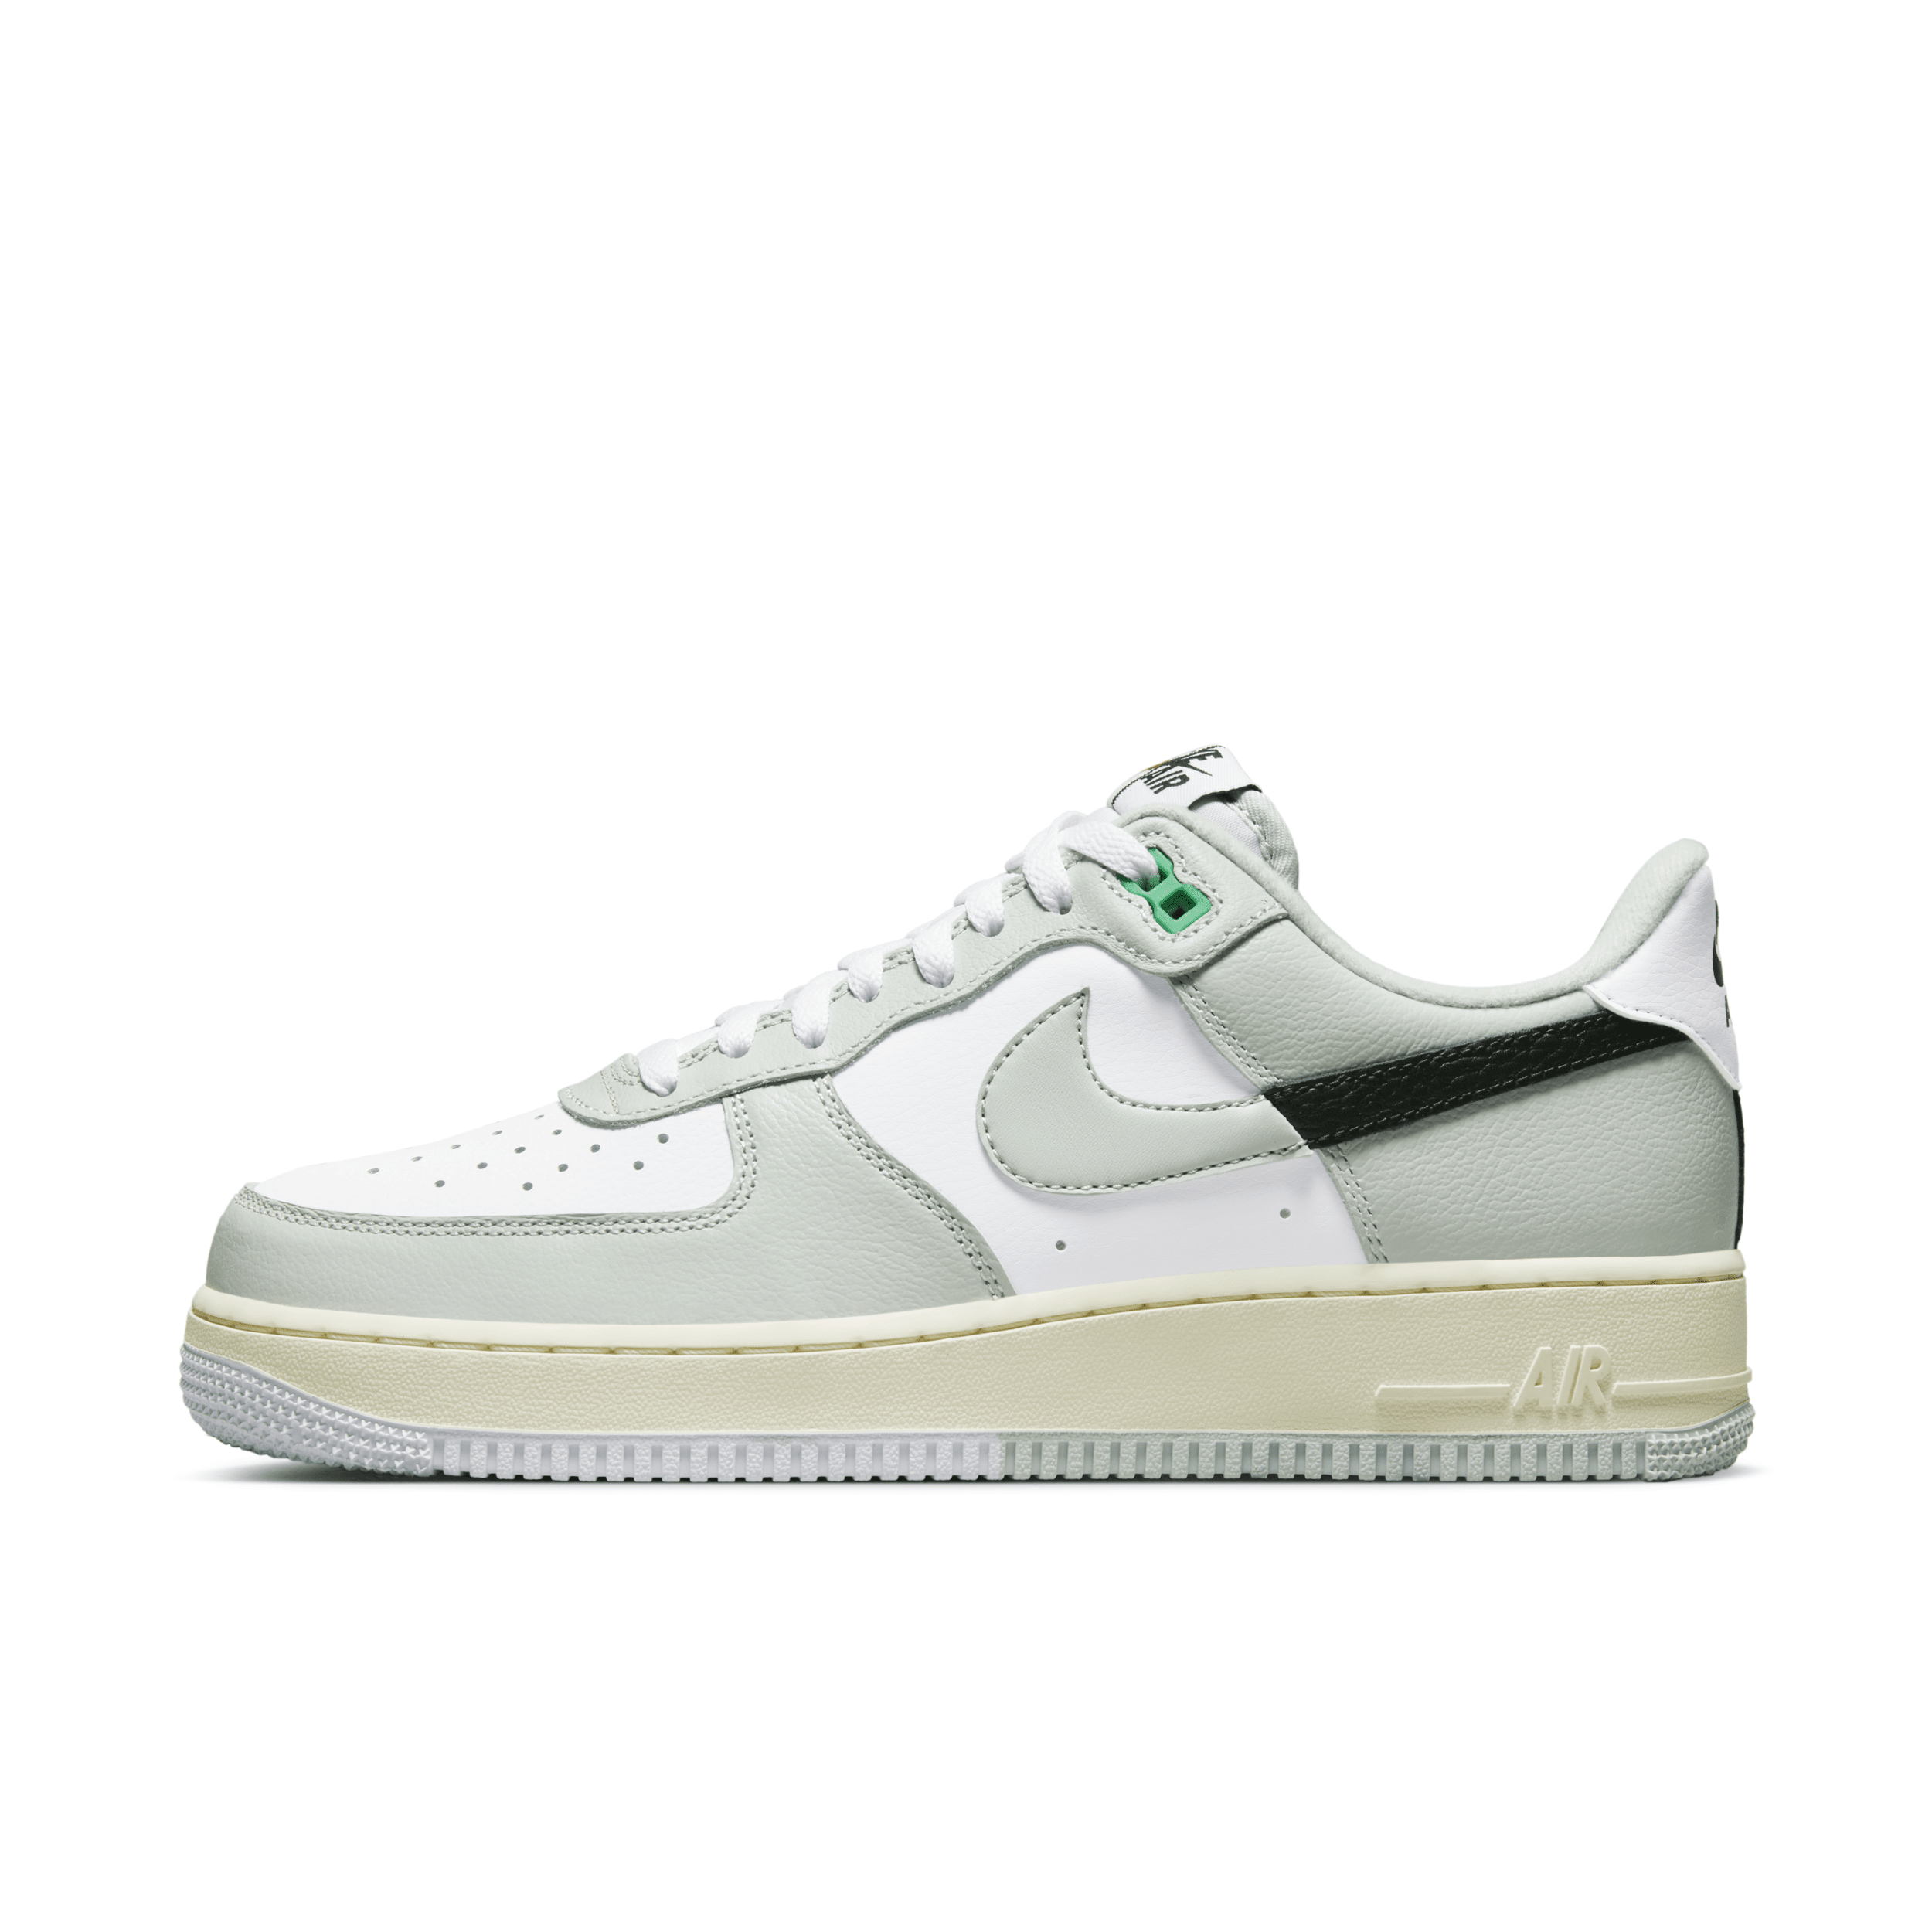 NIKE MEN'S AIR FORCE 1 '07 LV8 SHOES,1012328827